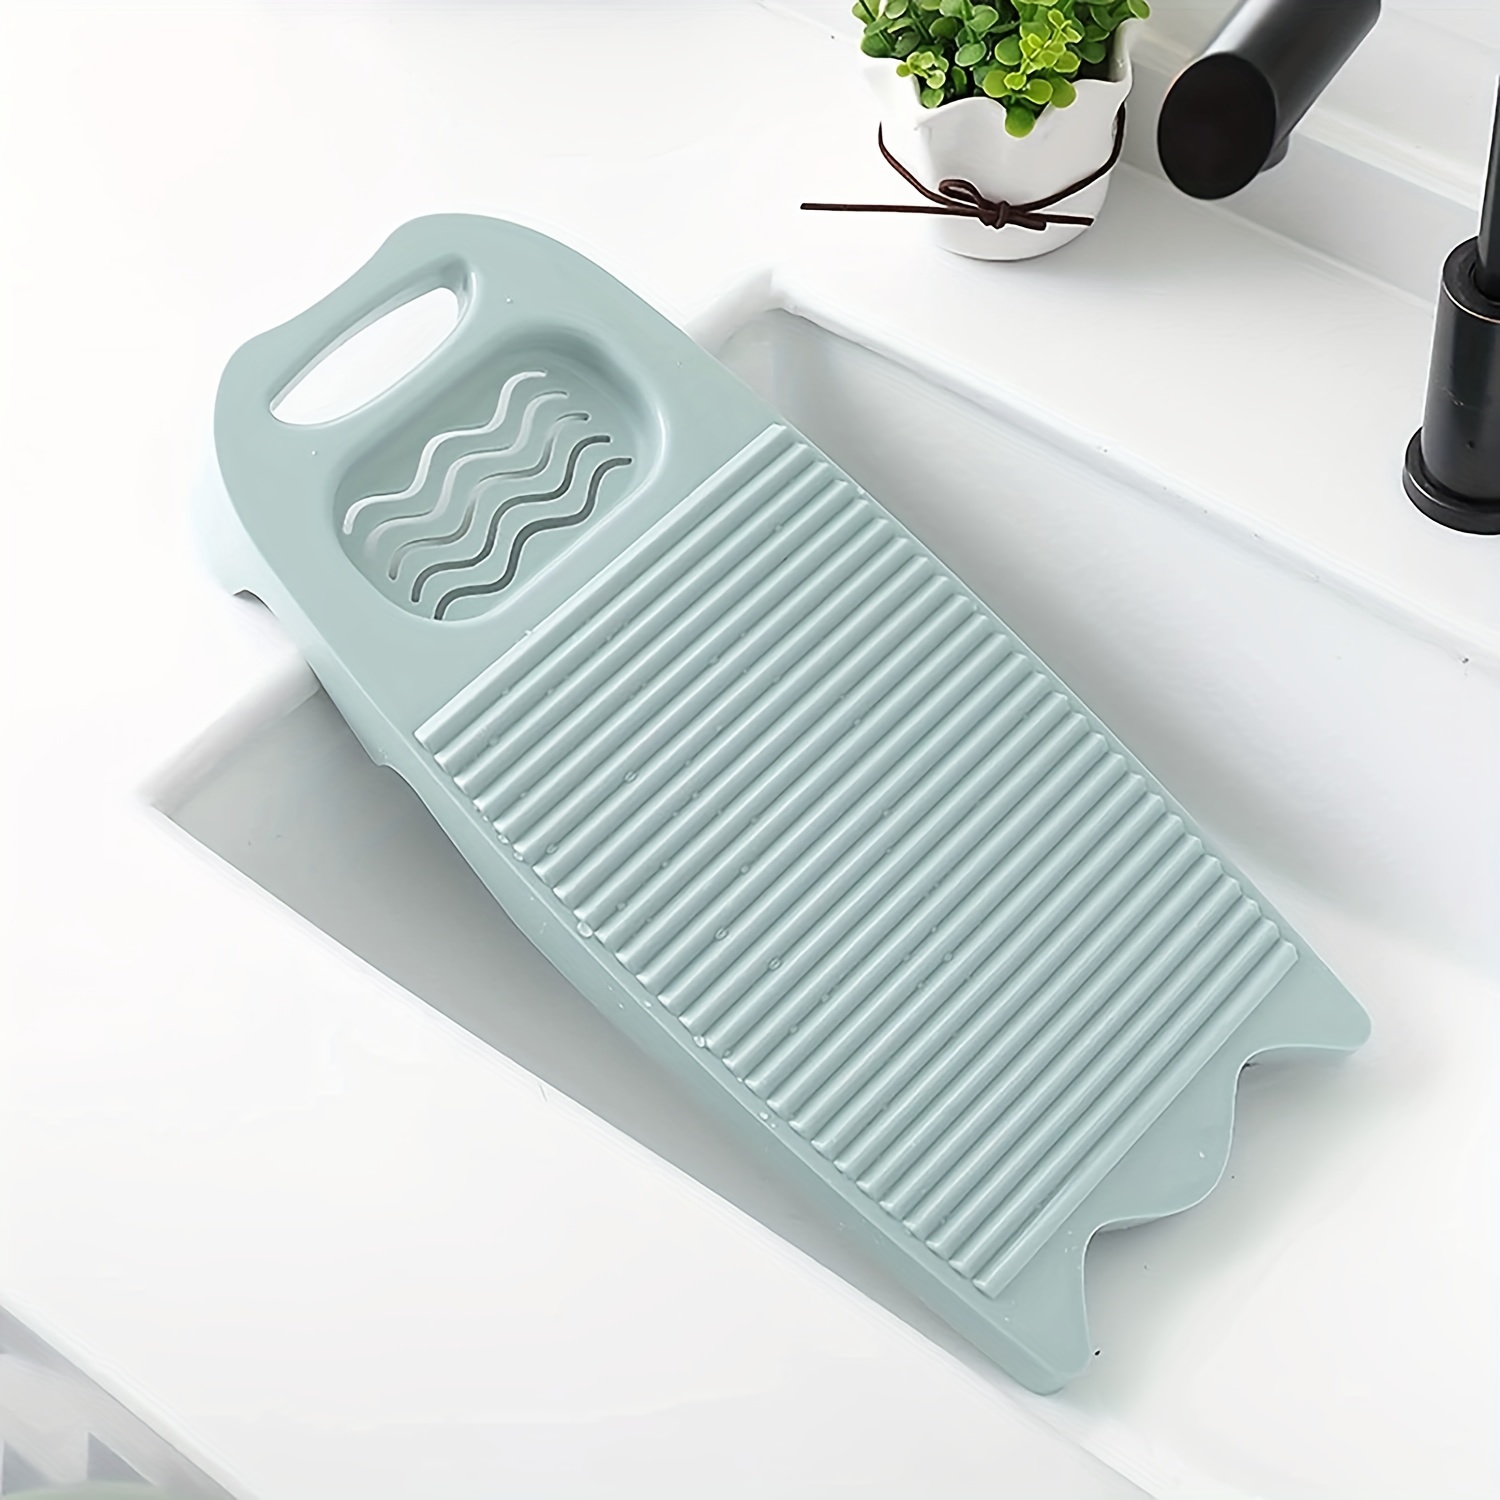 Plastic Washboard for Hand Washing Clothes - Household Laundry Board